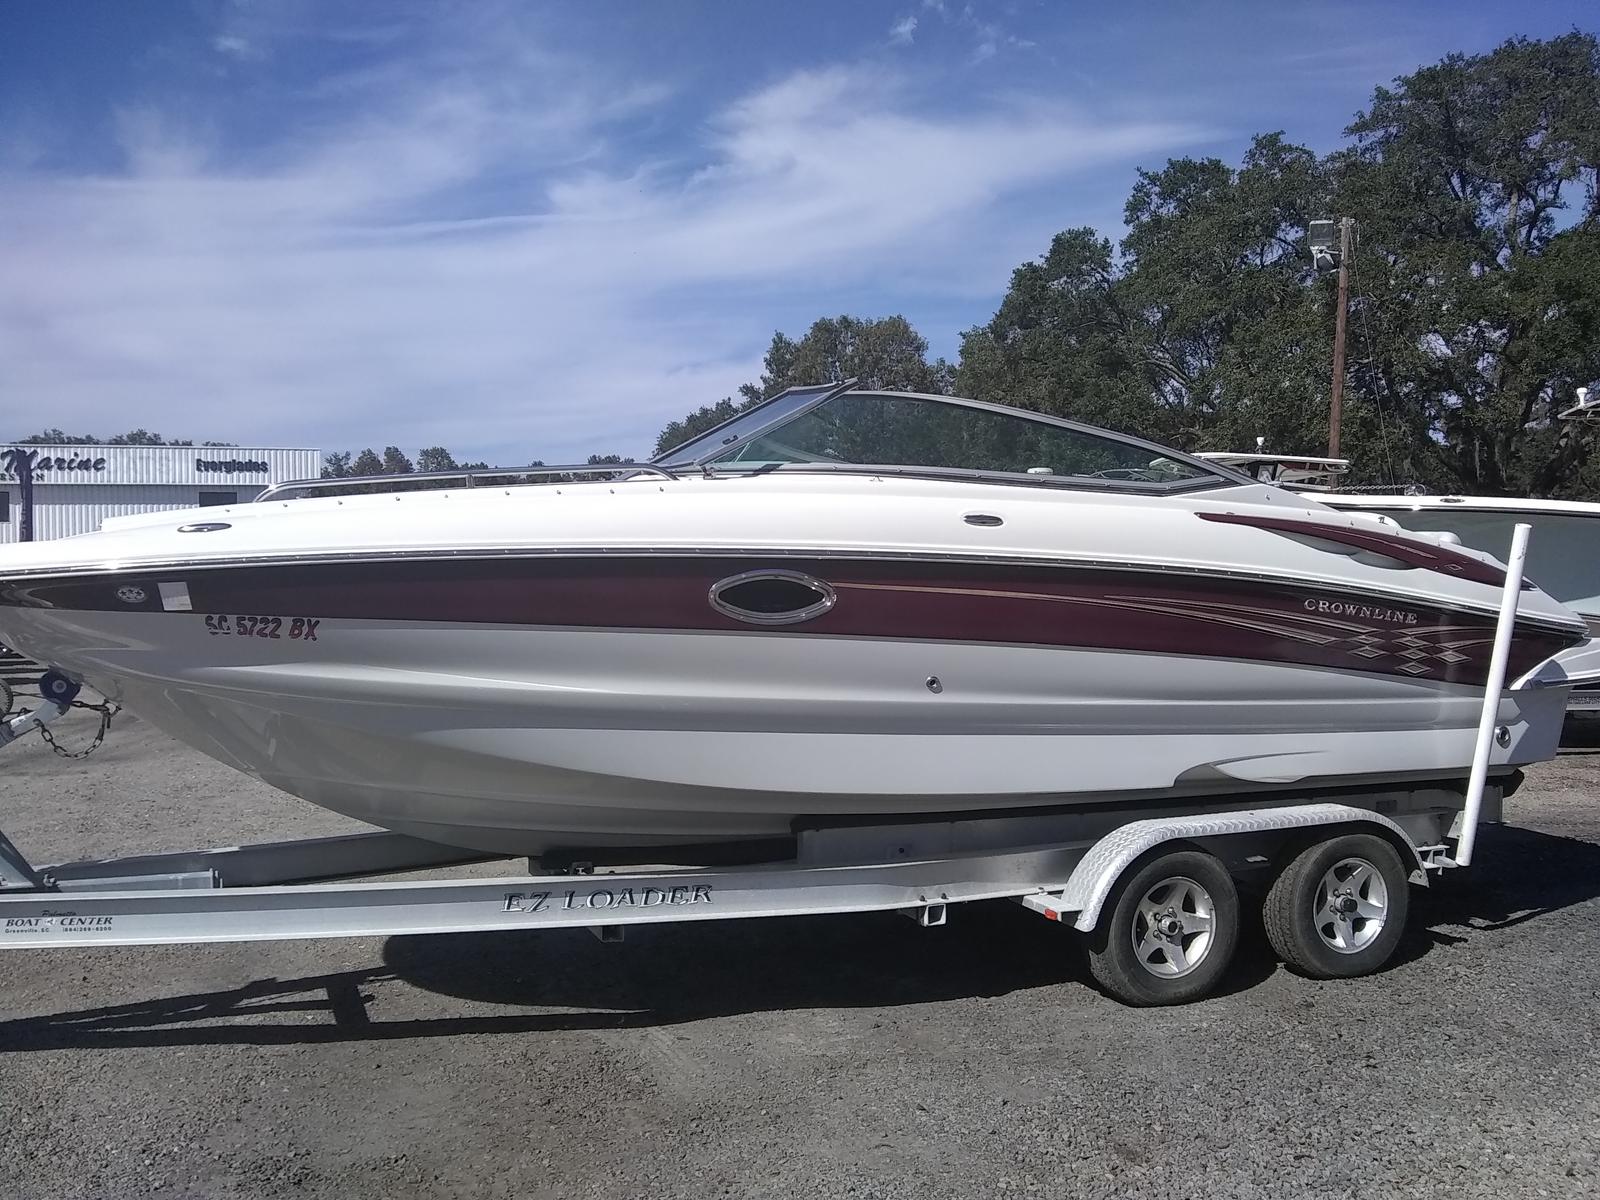 Crownline 240 Ex Boats For Sale Boatscom.